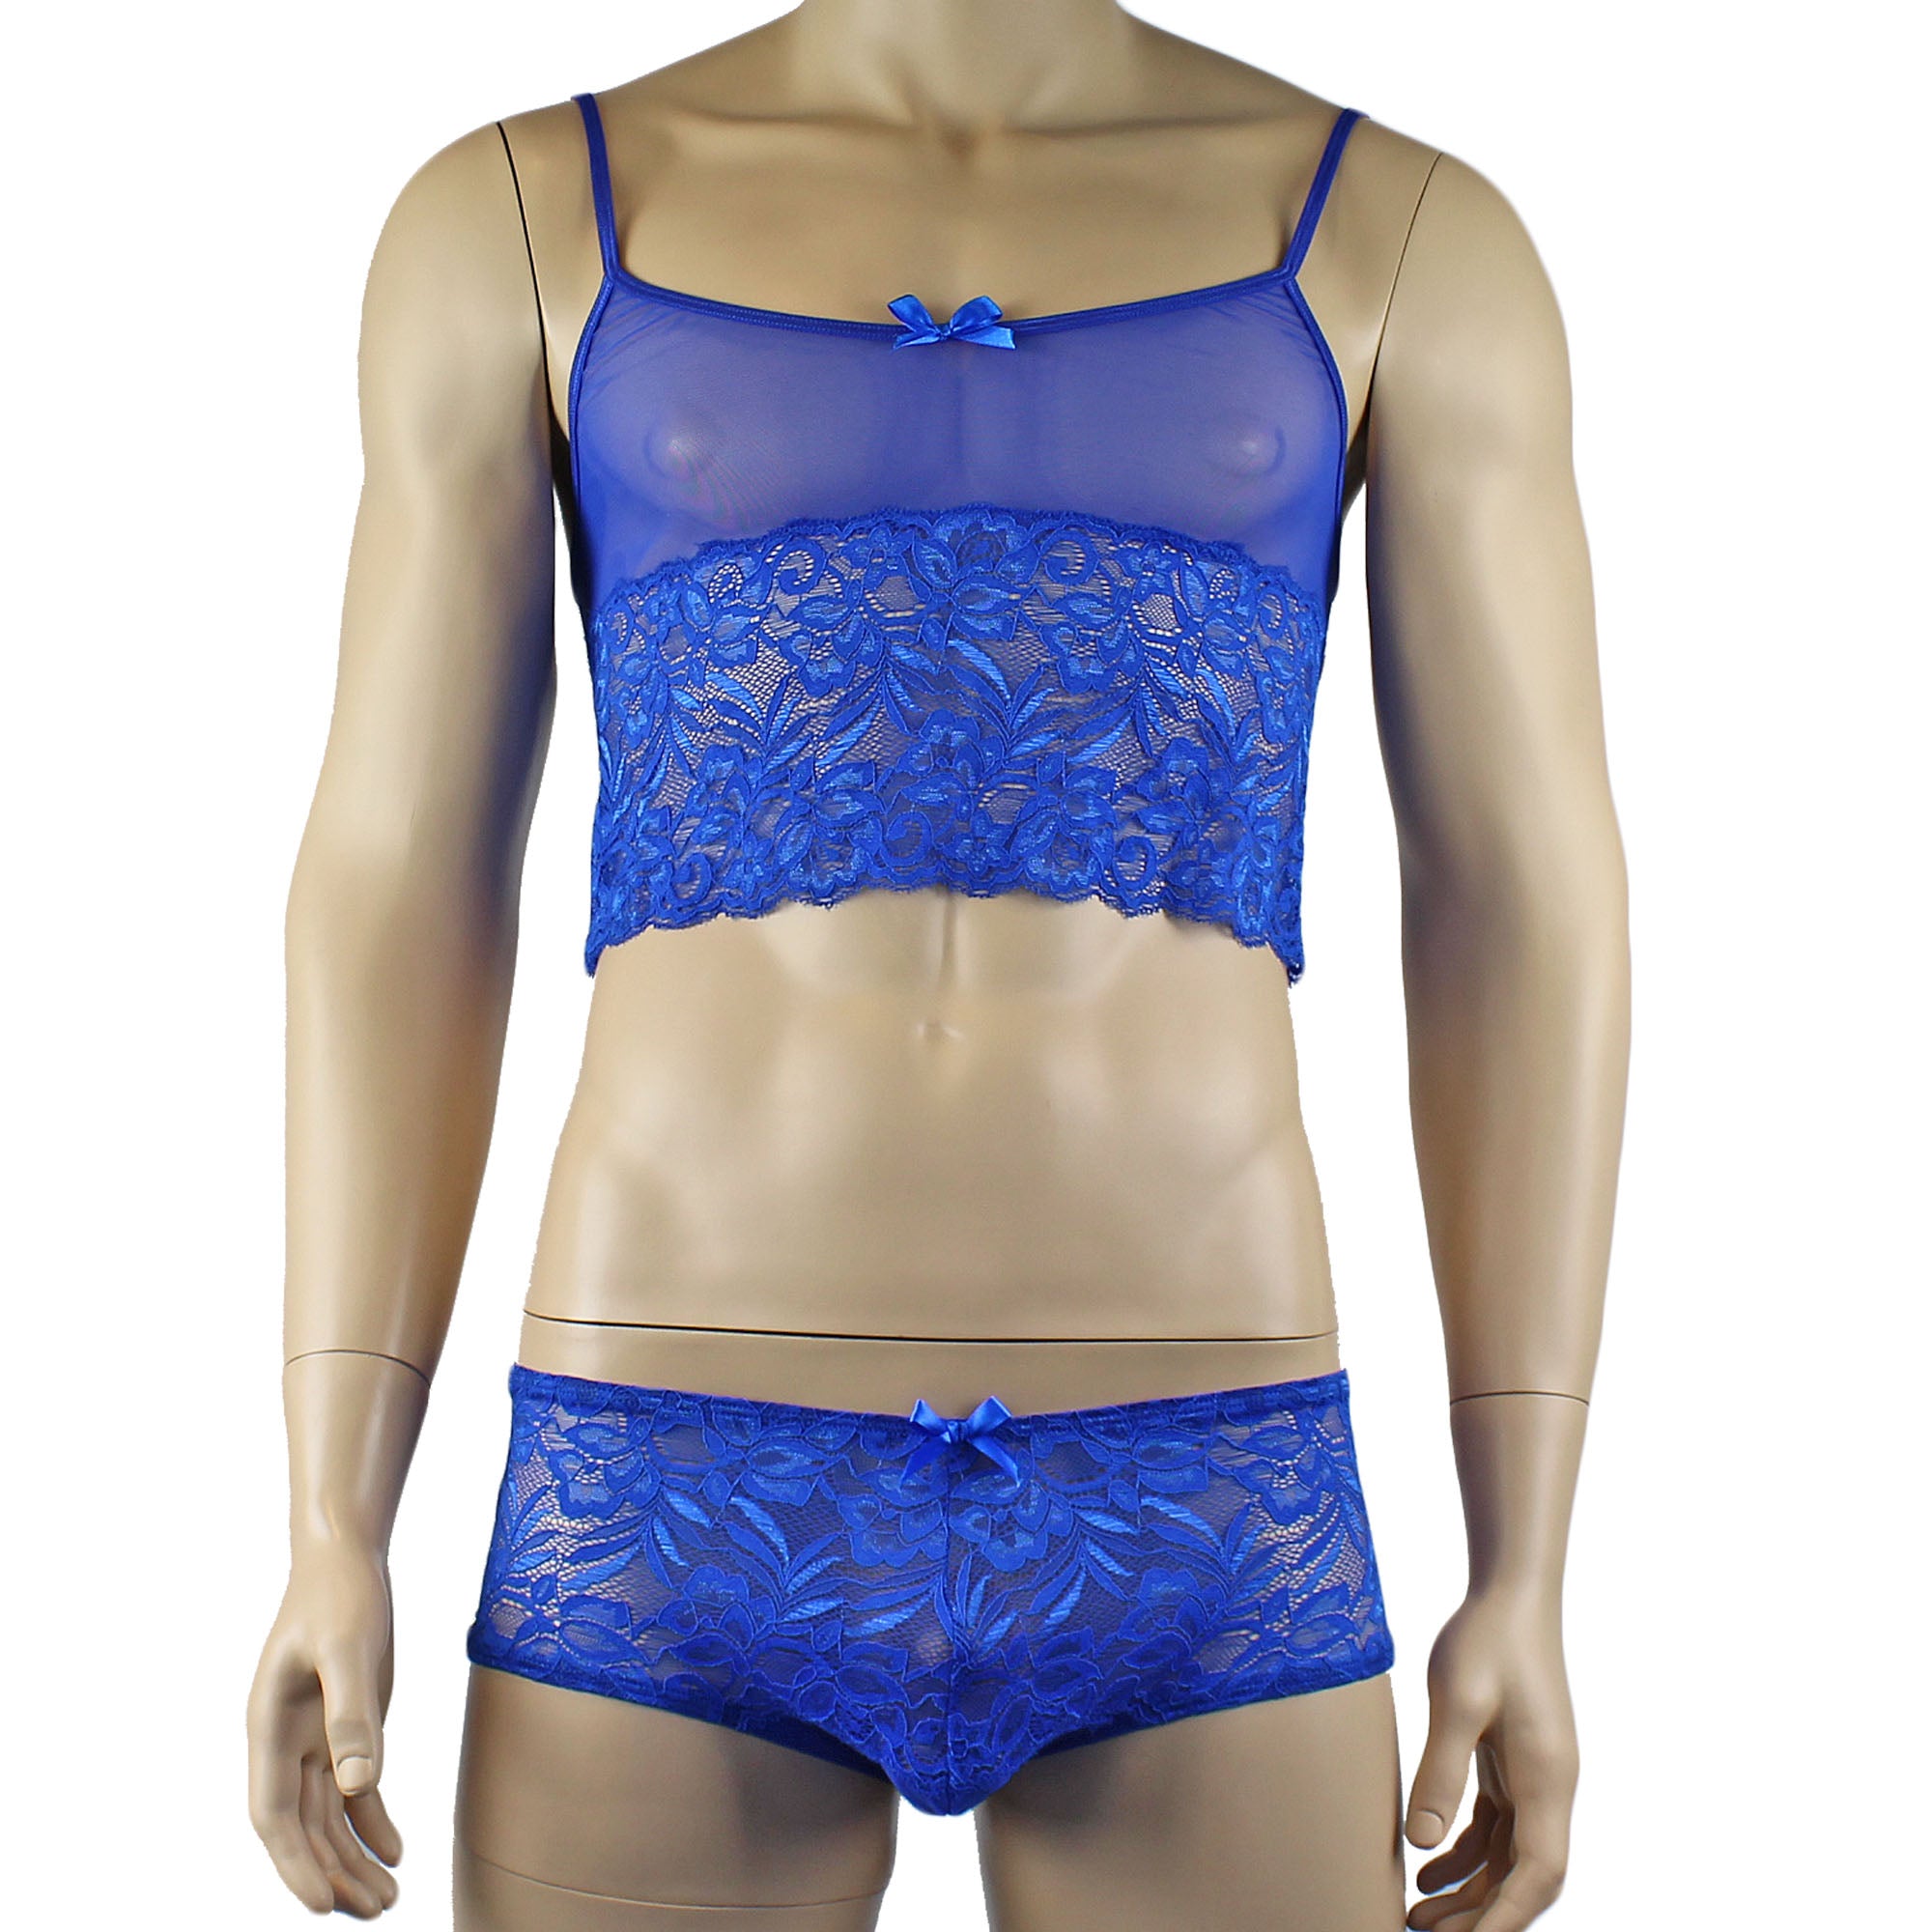 Mens Kristy Sexy Lace Camisole Top and Panty Brief Blue